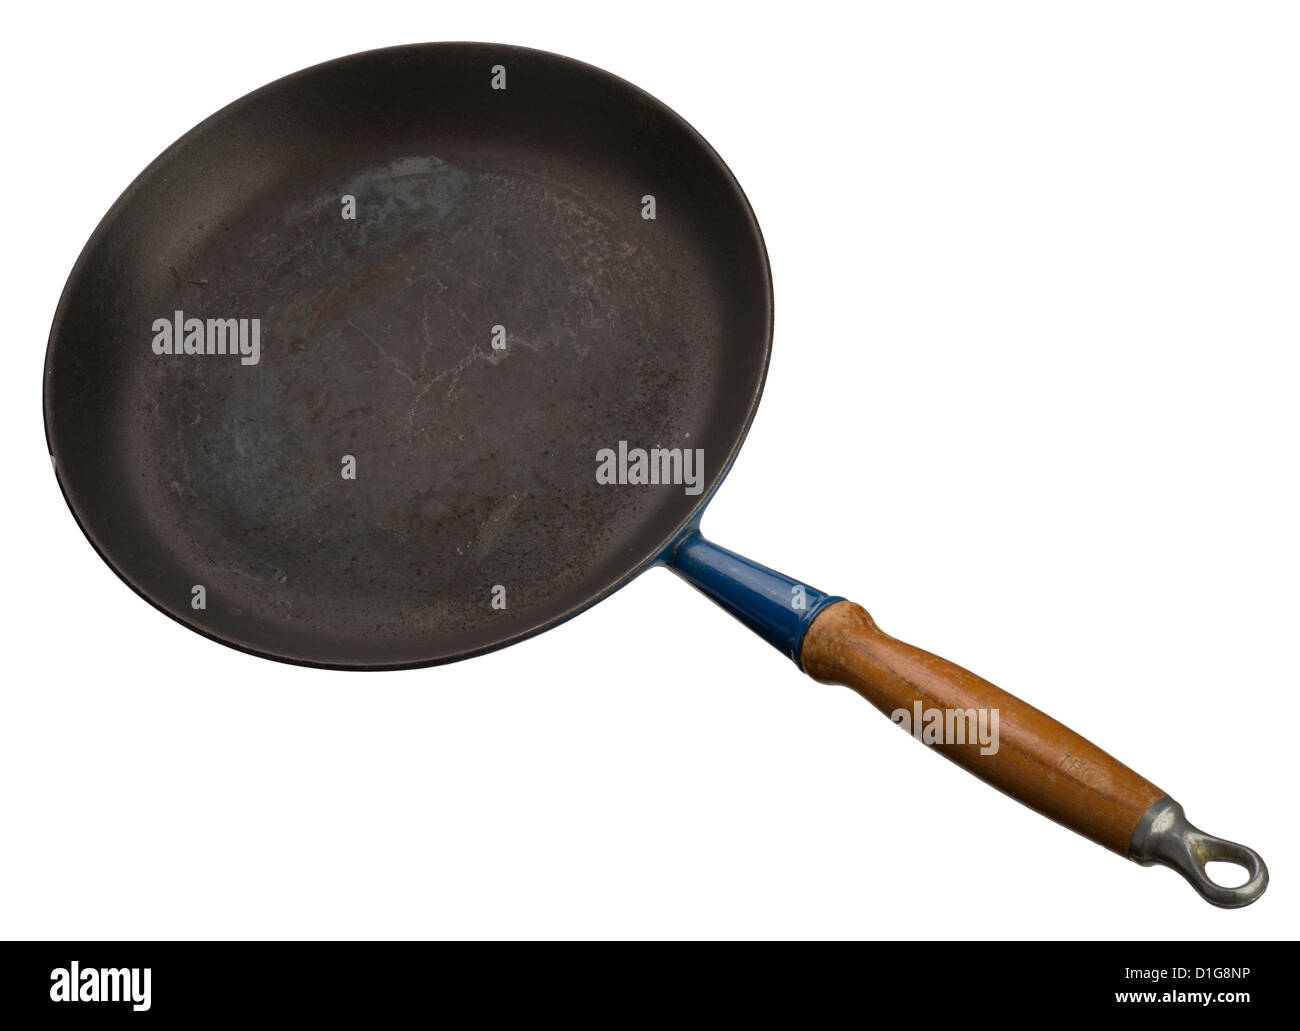 https://c8.alamy.com/comp/D1G8NP/old-frying-pan-with-worn-out-non-stick-surface-D1G8NP.jpg